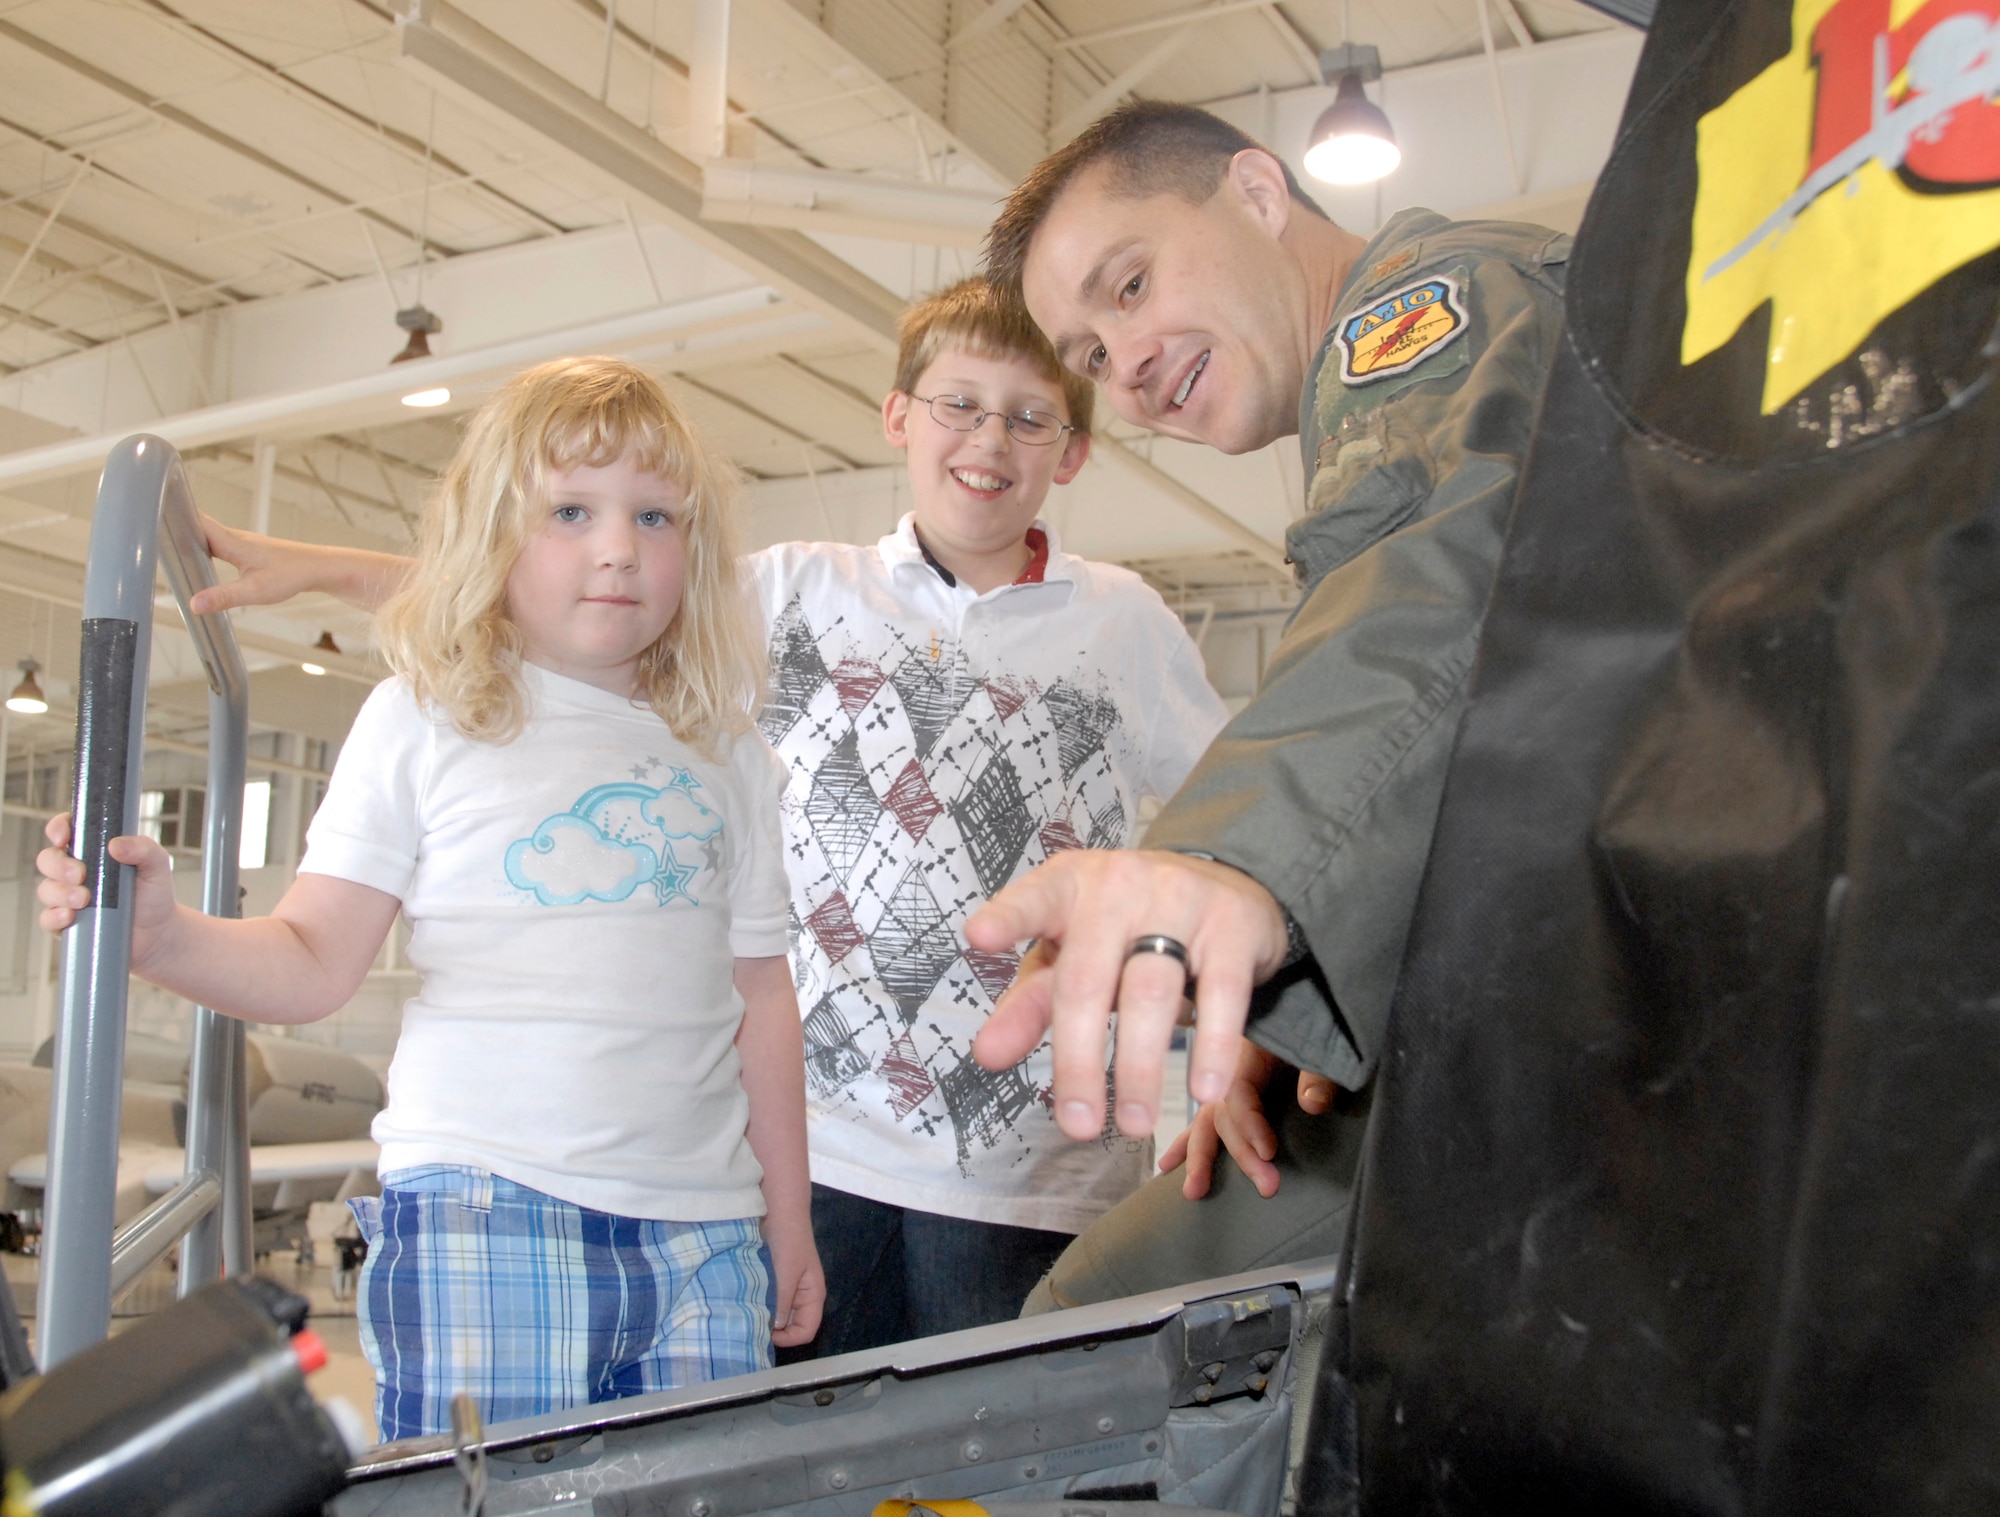 Maj. Todd Riddle, A-10 pilot from the 303rd Fighter Squadron, explains an A-10 Thunderbolt II cockpit to Mason, 10, and Samantha, 5, during a Yellow-Ribbon program event at the 442nd Fighter Wing at Whiteman Air Force Base, Mo., Sep. 26.  The Yellow-Ribbon program is designed to assist Air Force Reservists and their familly members deal with the stress of extended combat deployments.  Mason and Samantha are the children of a 442nd Security Forces Squadron Citizen Airman currently deployed for Operation Iraqi Freedom.  Currently, many of the wing's security forces members are deployed to provide air-base defense at deployed locations.  The 442nd Security Forces Squadron deploys more than any other unit in the wing, which has a proud tradition of deployments for the Global War Against Terror.  (U.S. Air Force photo/Maj. David Kurle) 